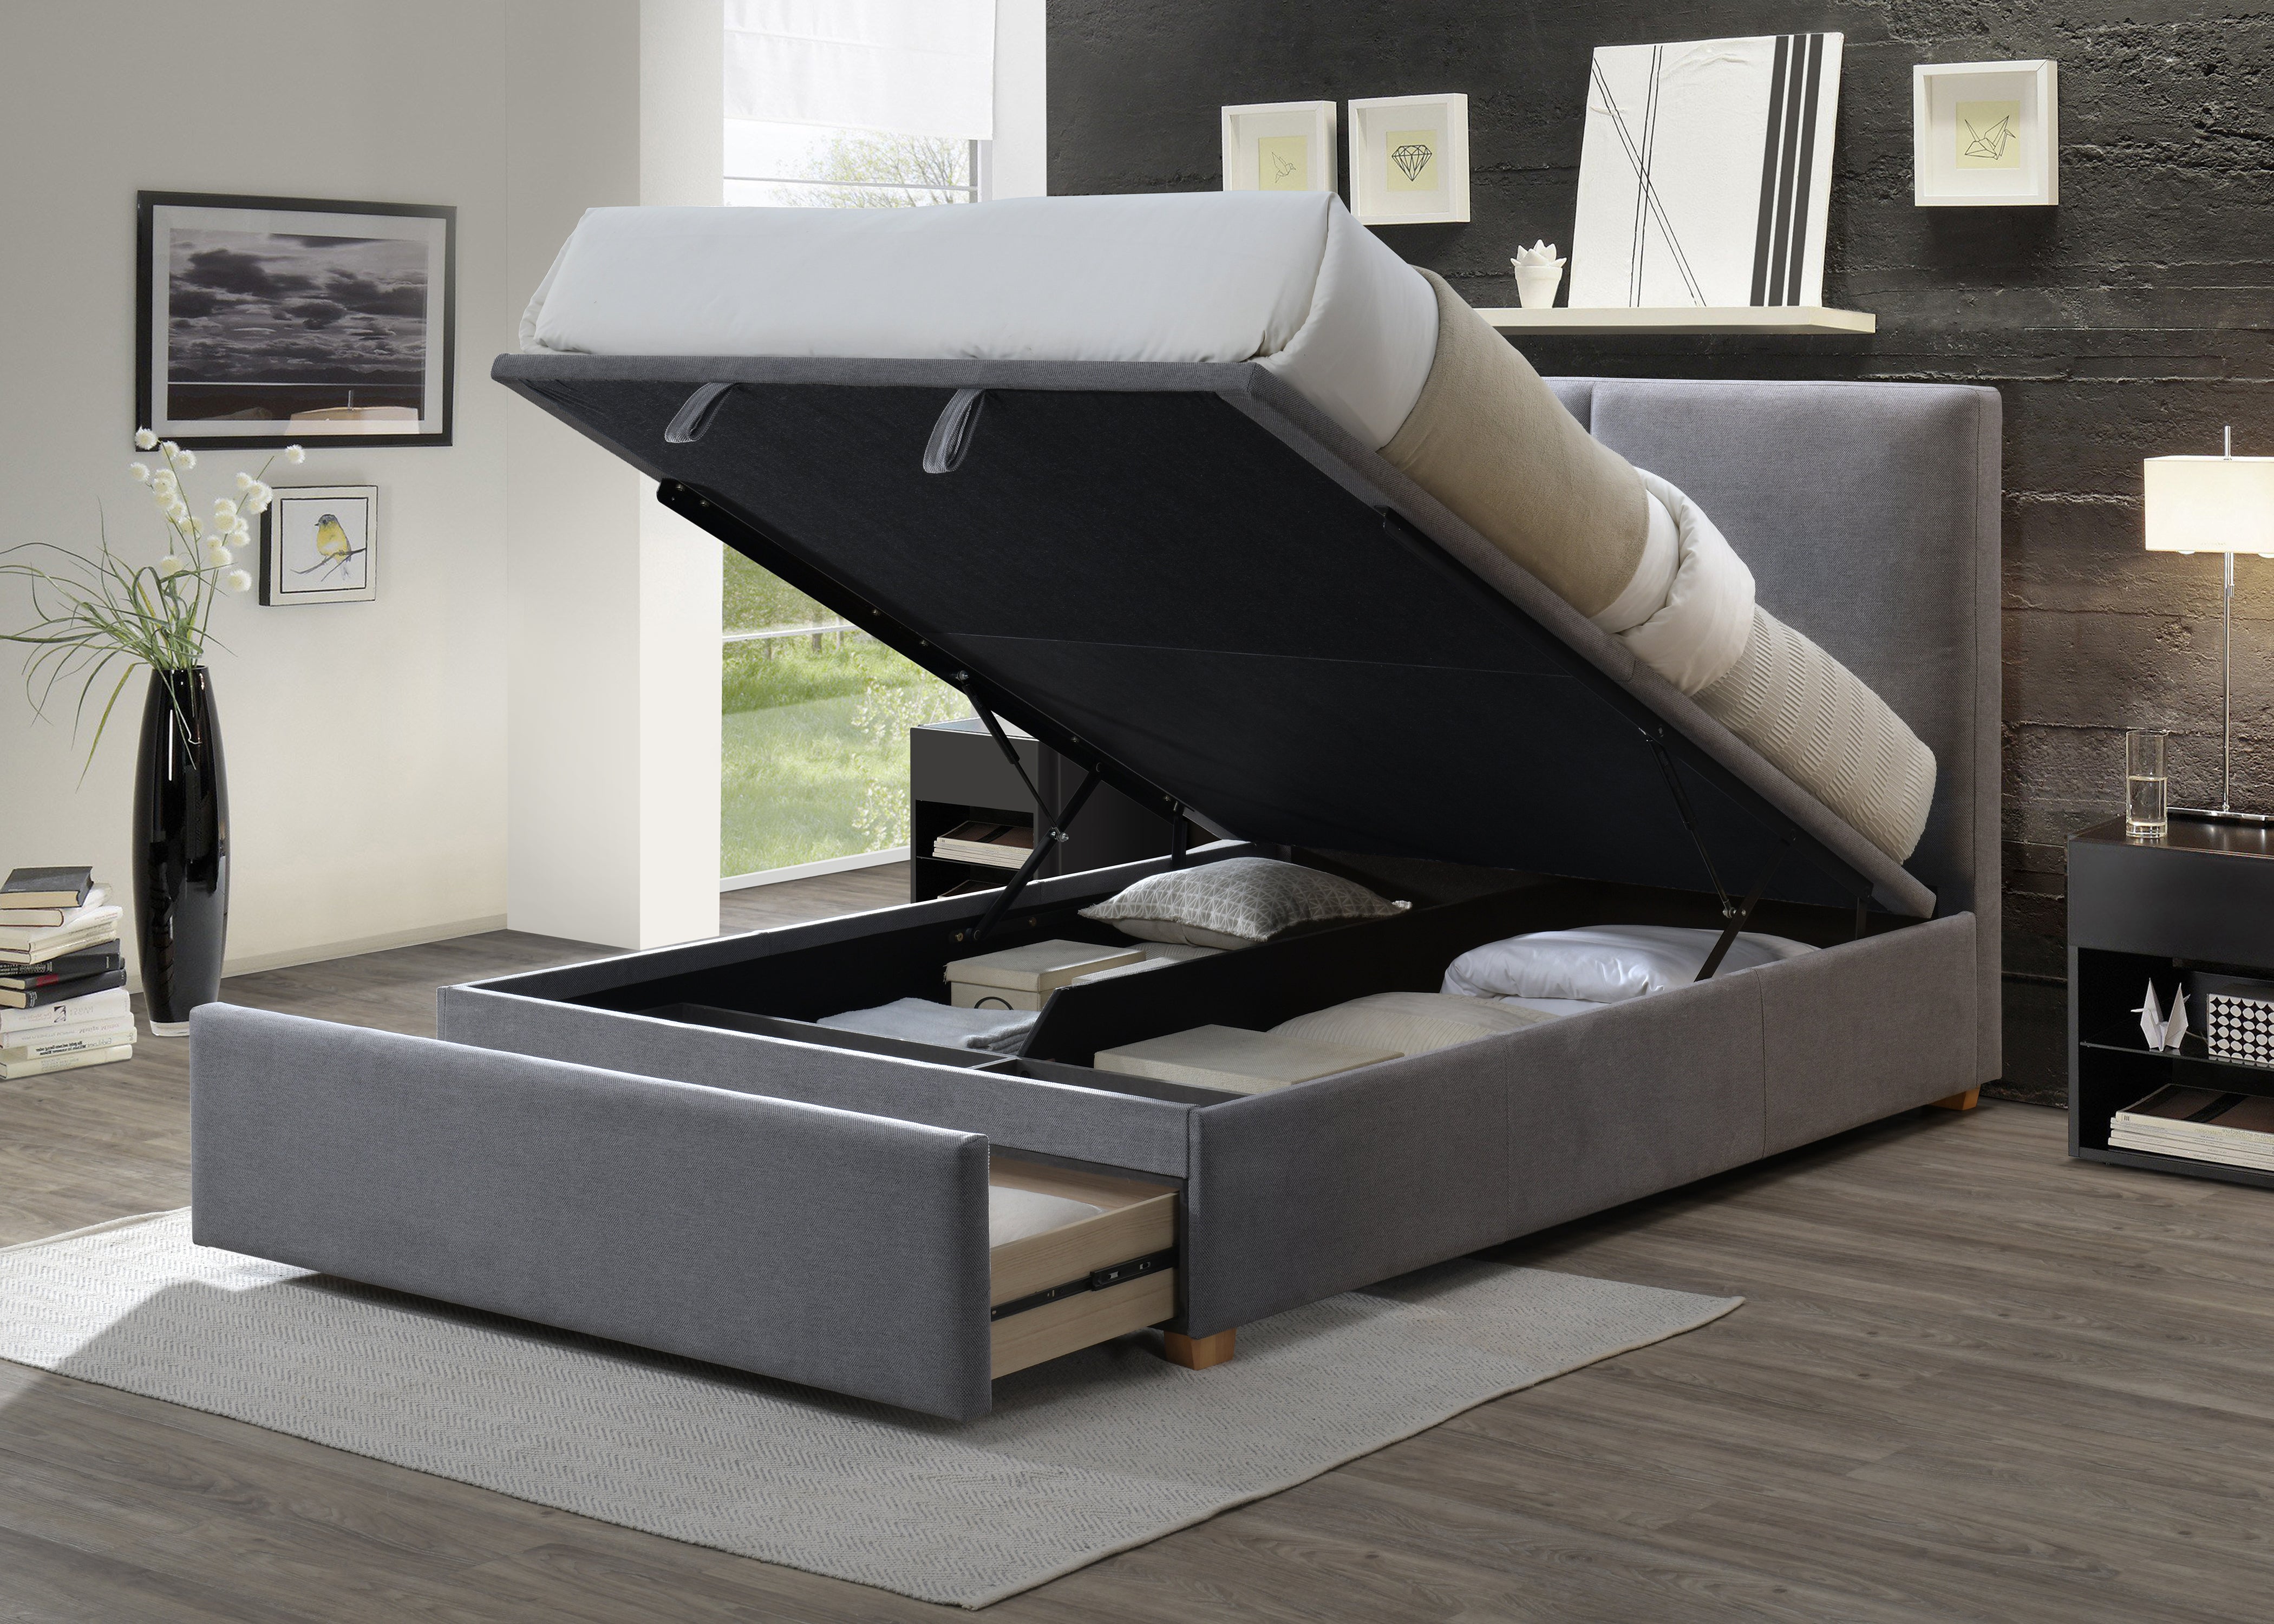 Shape Duo: Lift-Up Beds with Drawers in Jam 10 Blue Steel